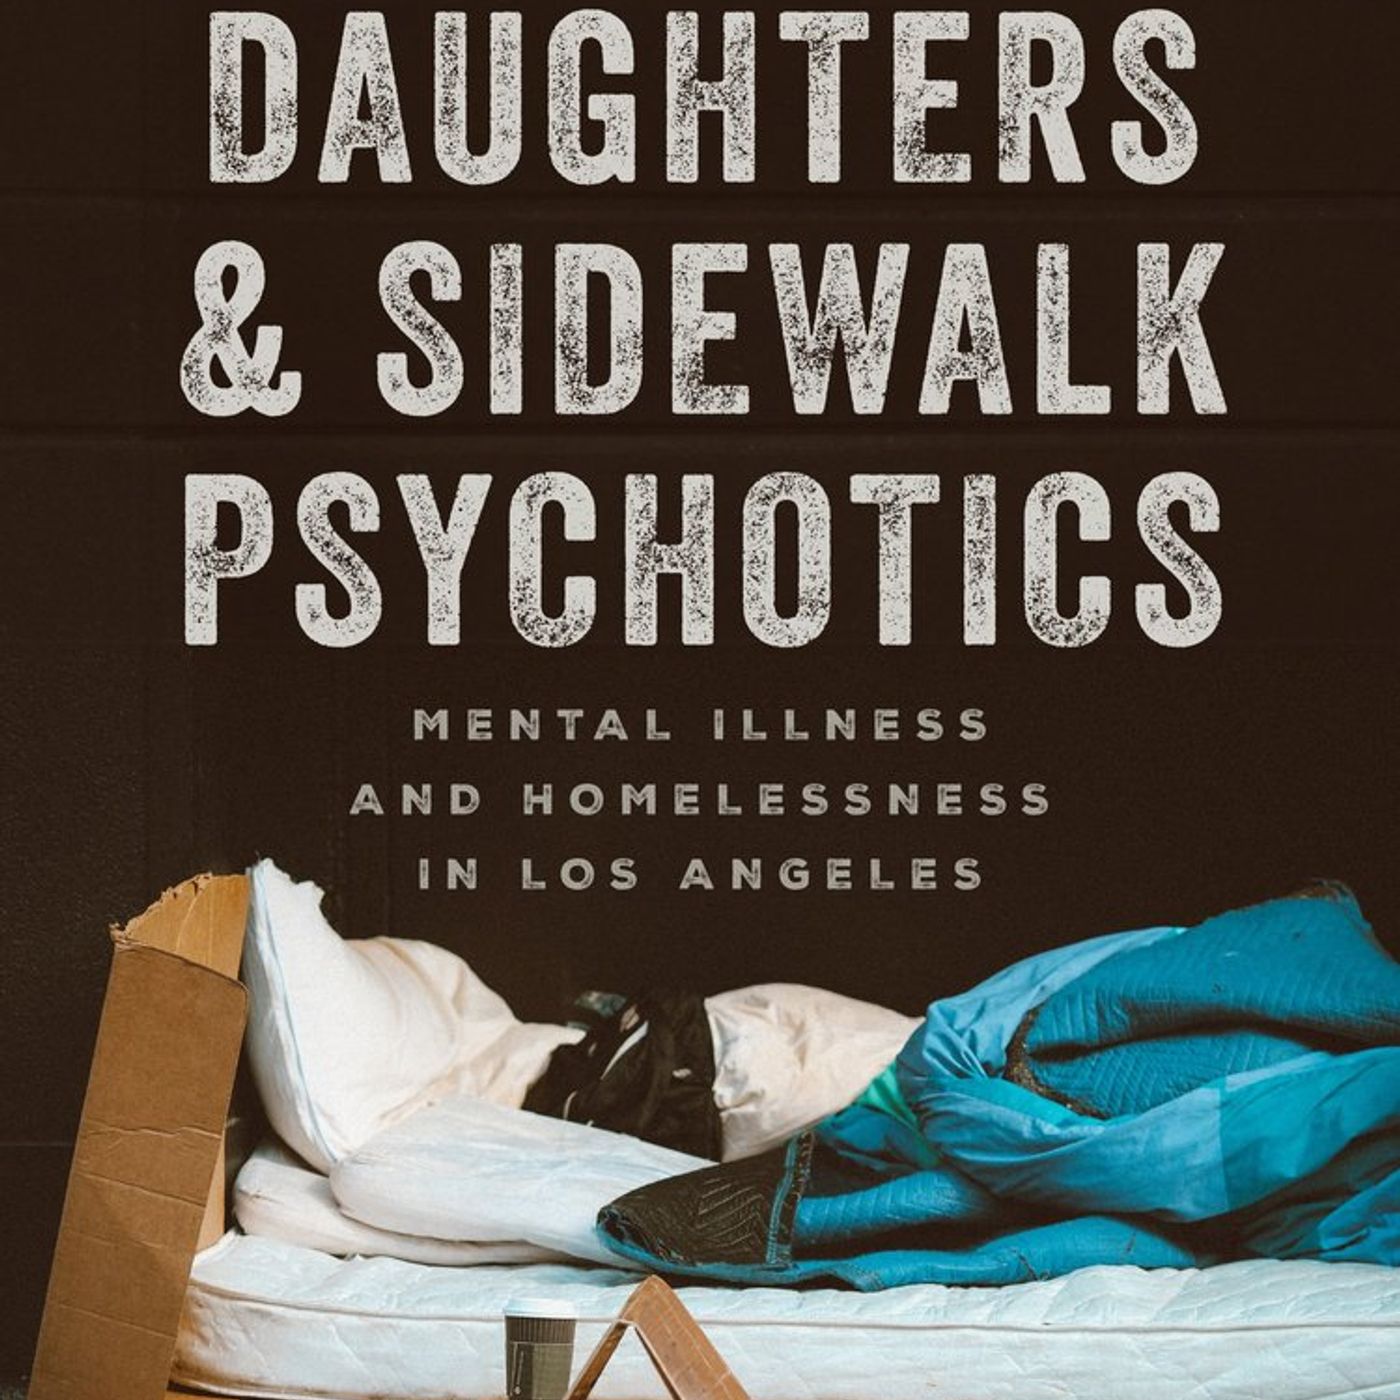 QPP 58: Neil Gong — Sons, Daughters, and Sidewalk Psychotics